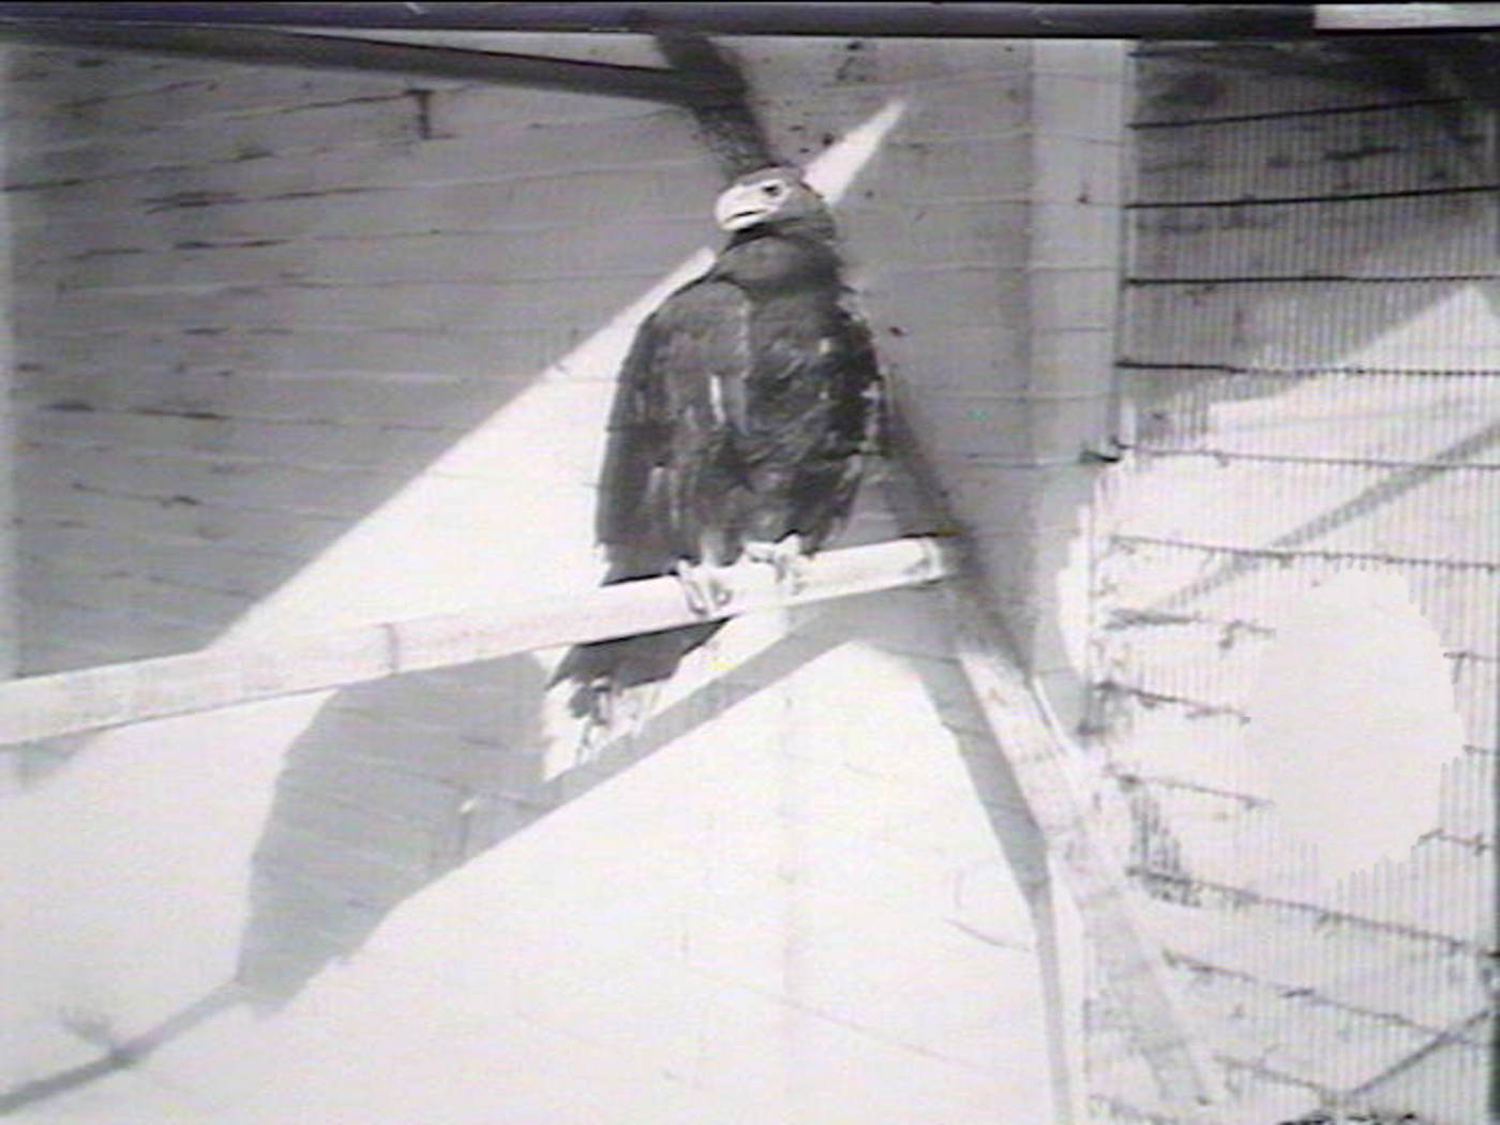 Archival image of an eagle digitally altered to remove part of the enclosure fence